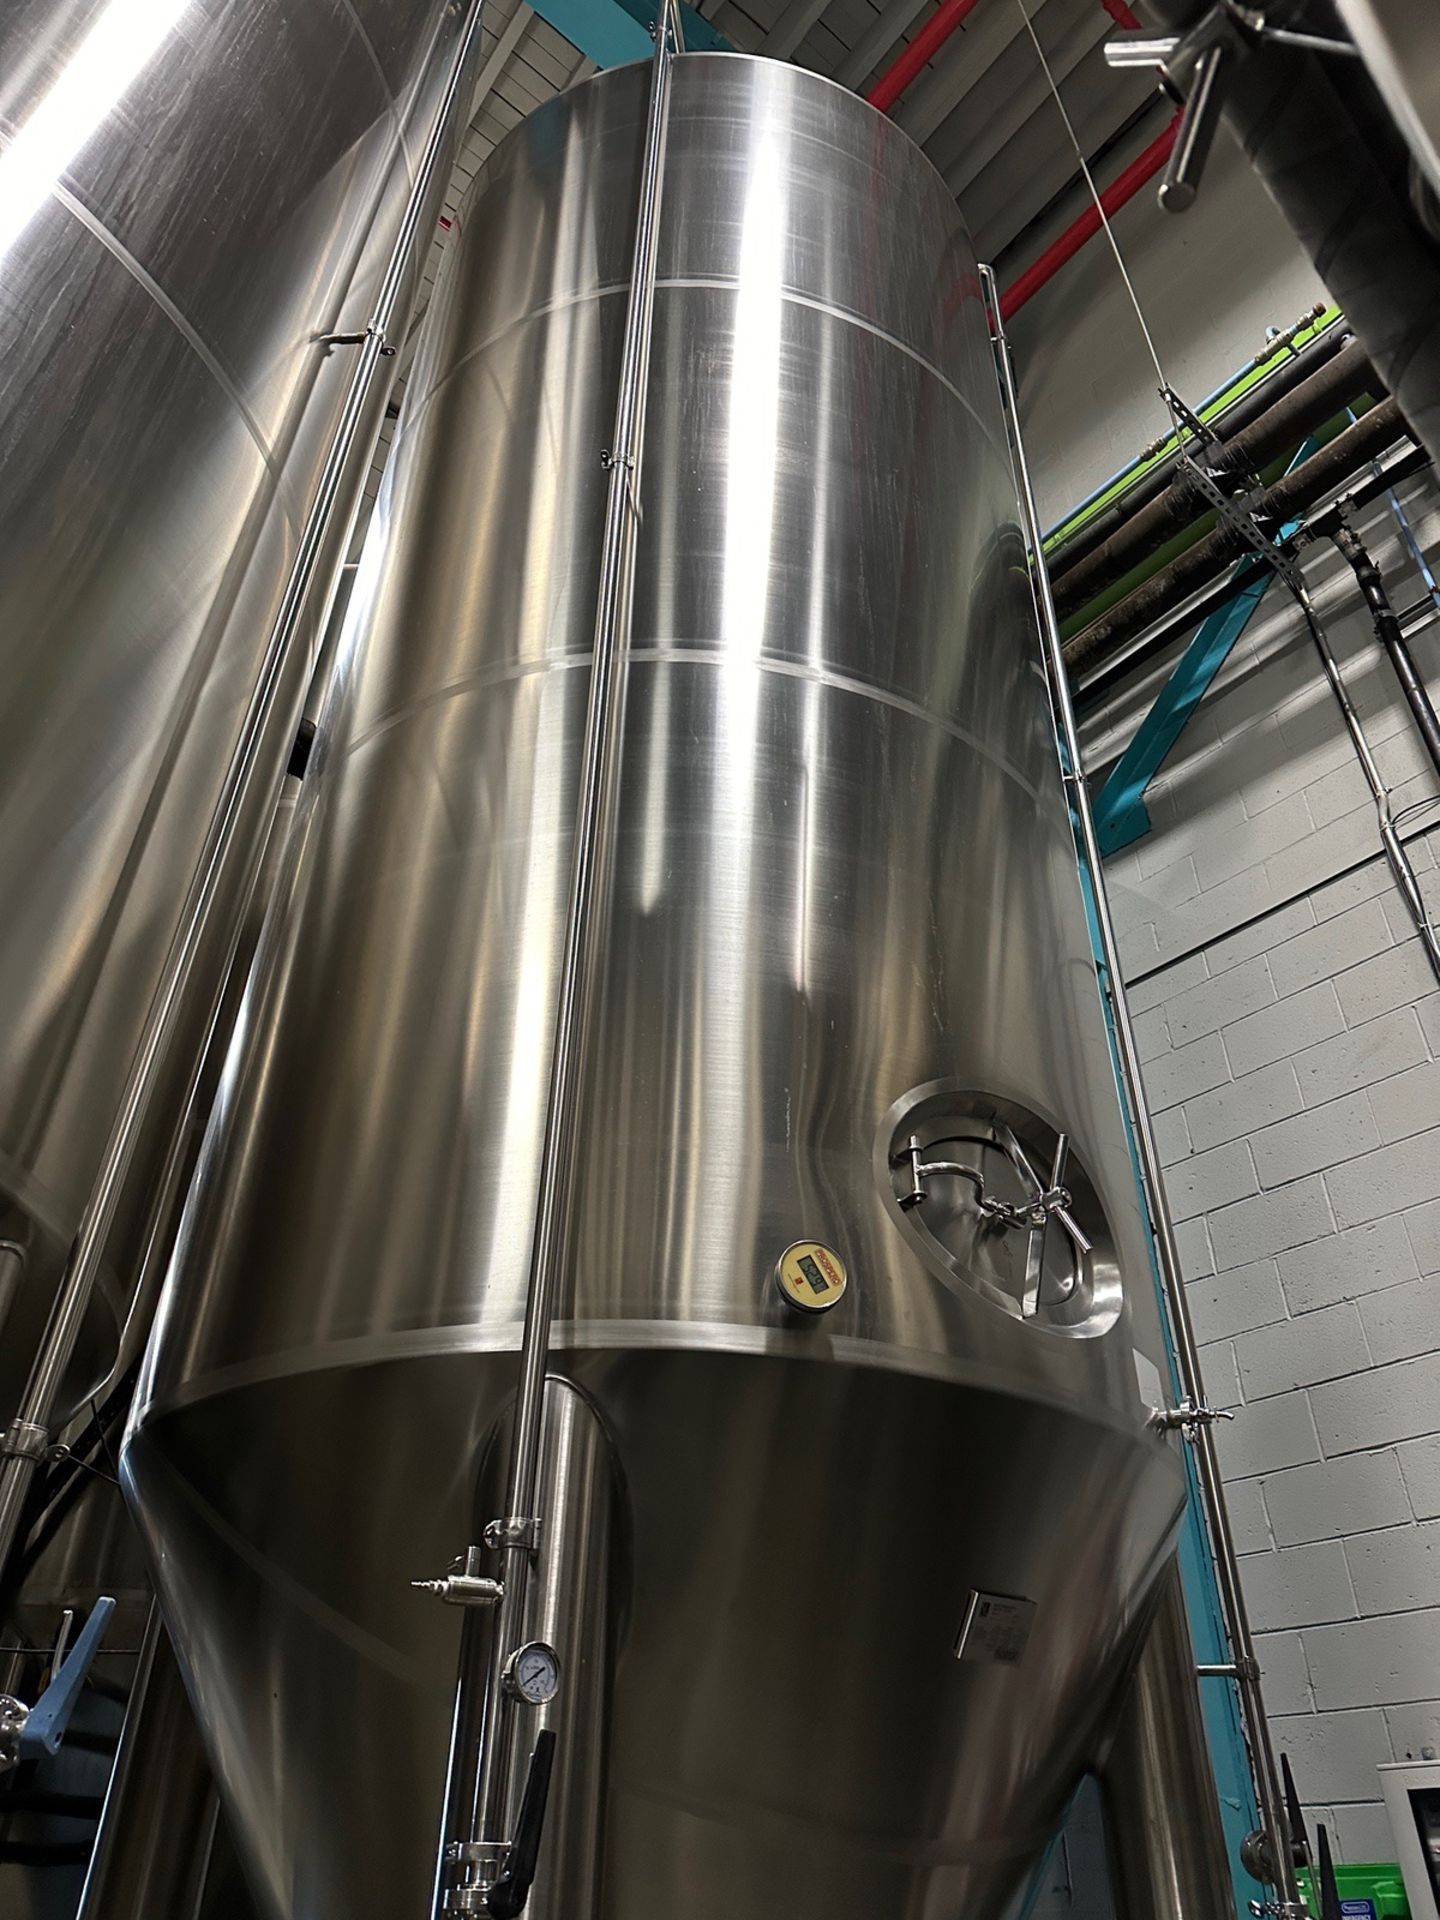 2018 Prospero SK 120 BBL Fermenter, Glycol Jacketed, Approx 7ft ID x 24ft OAH, S/N: 18102756 - Image 2 of 9